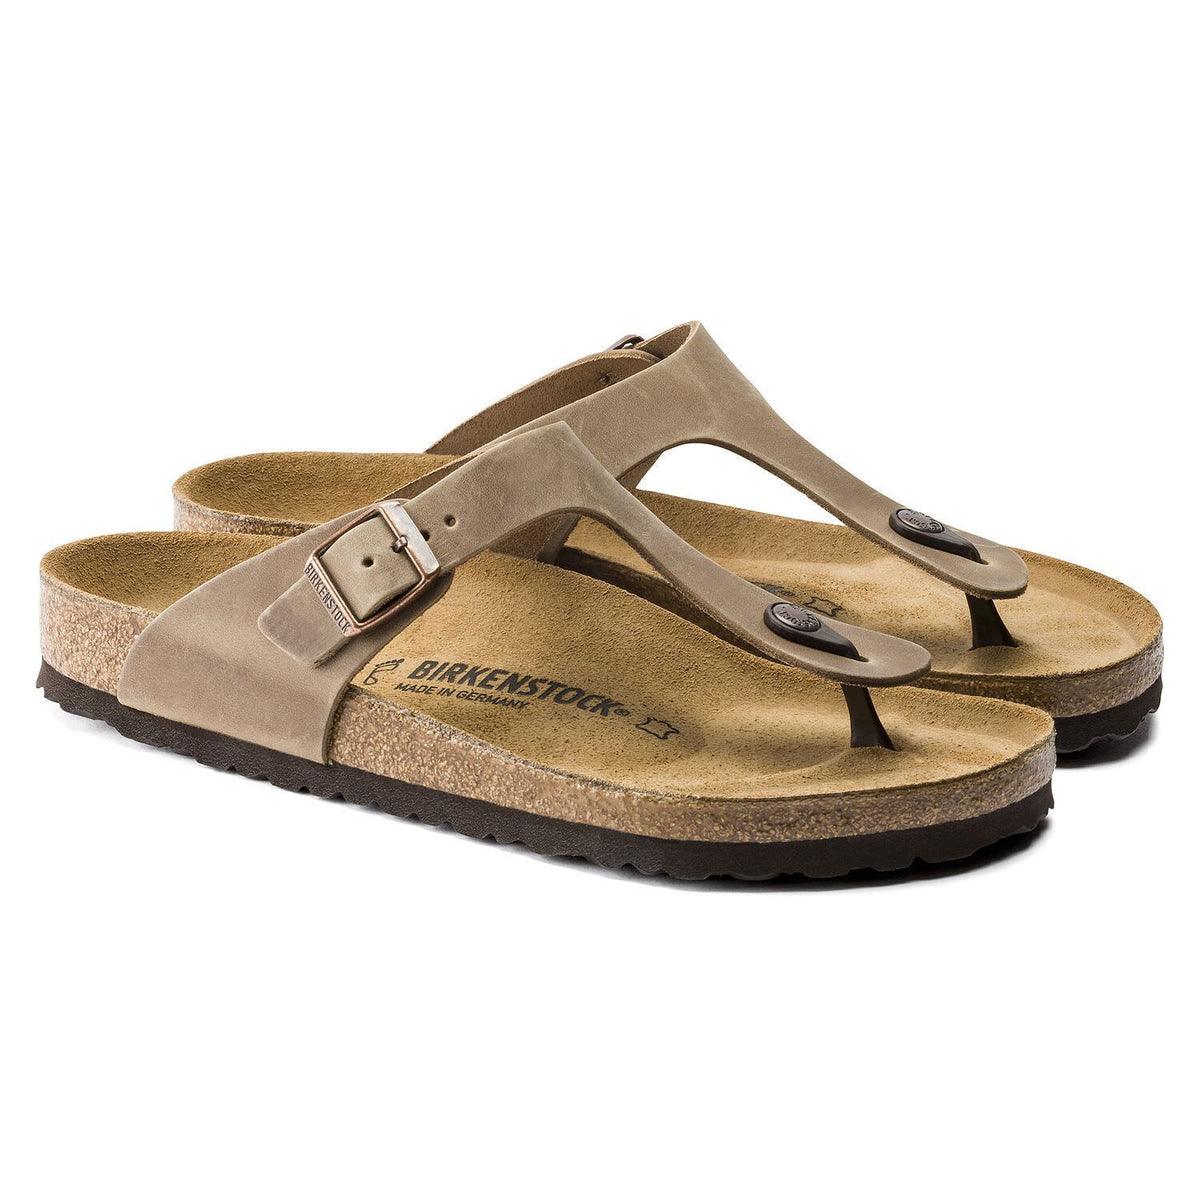 Birkenstock Classic, Gizeh, Natural Leather, Narrow Fit, Tabacco Brown Sandals Birkenstock Classic 